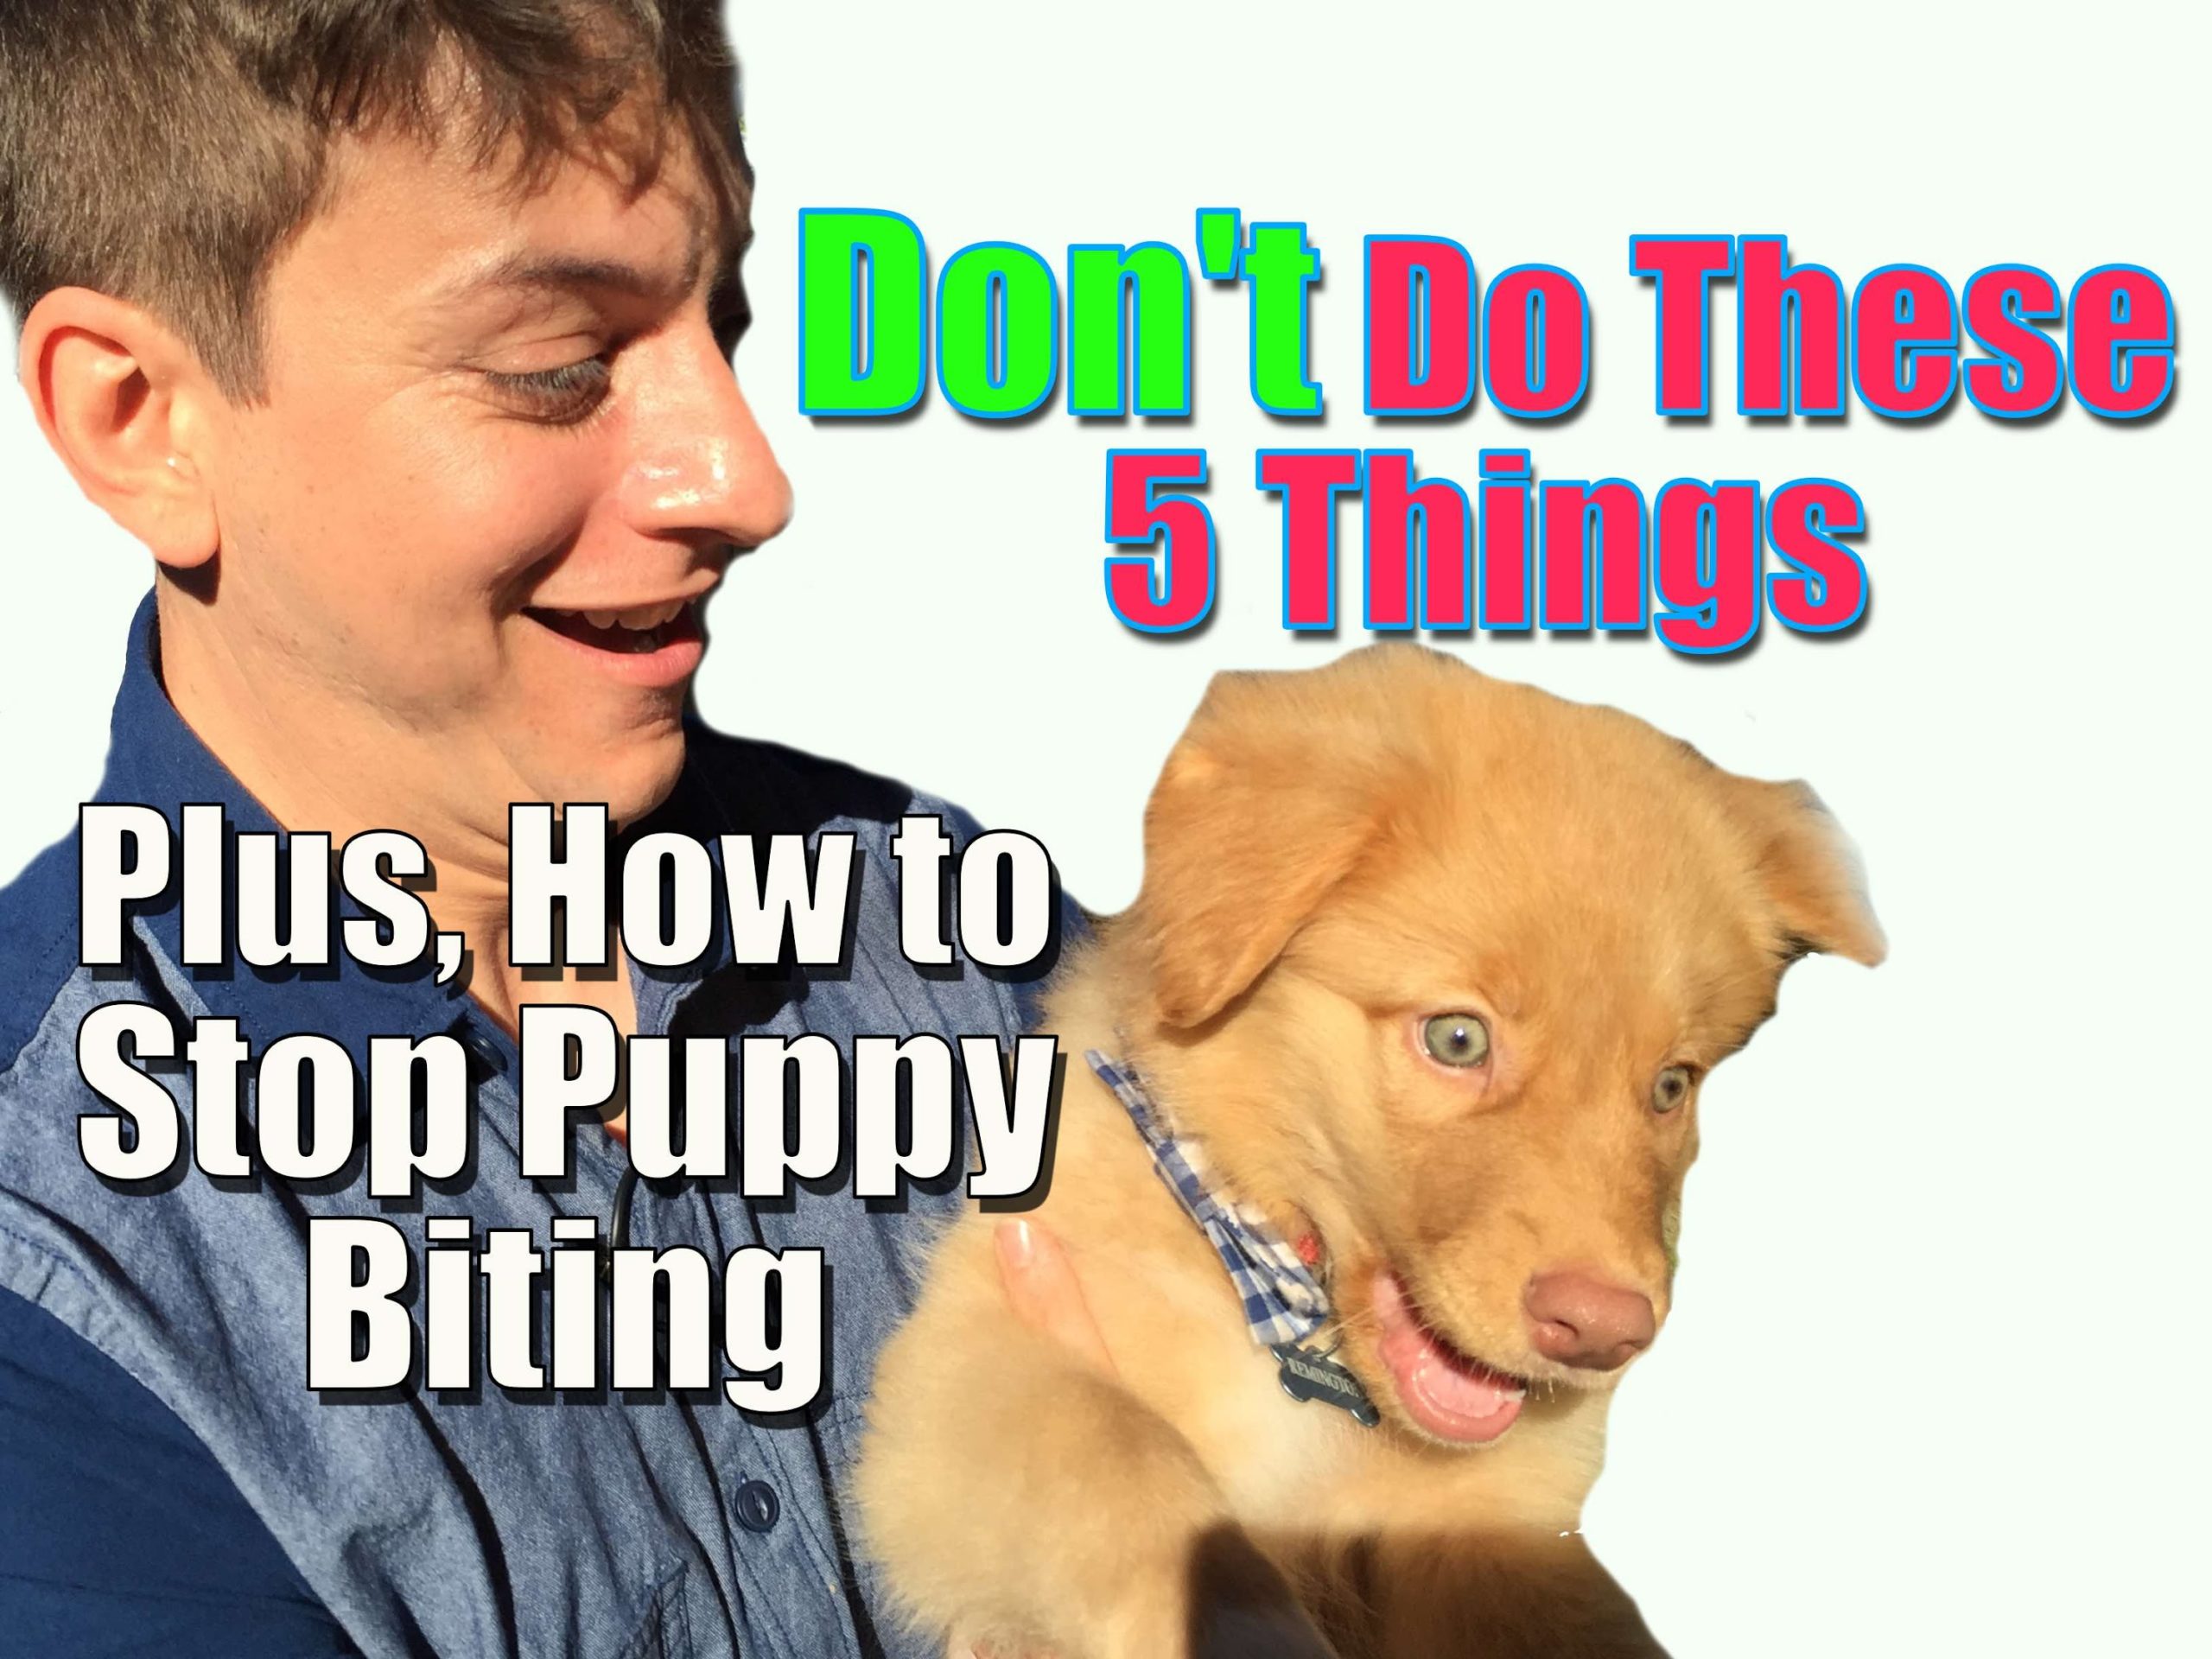 5 Things To Avoid When Training Your Puppy And How To Stop Puppy Biting